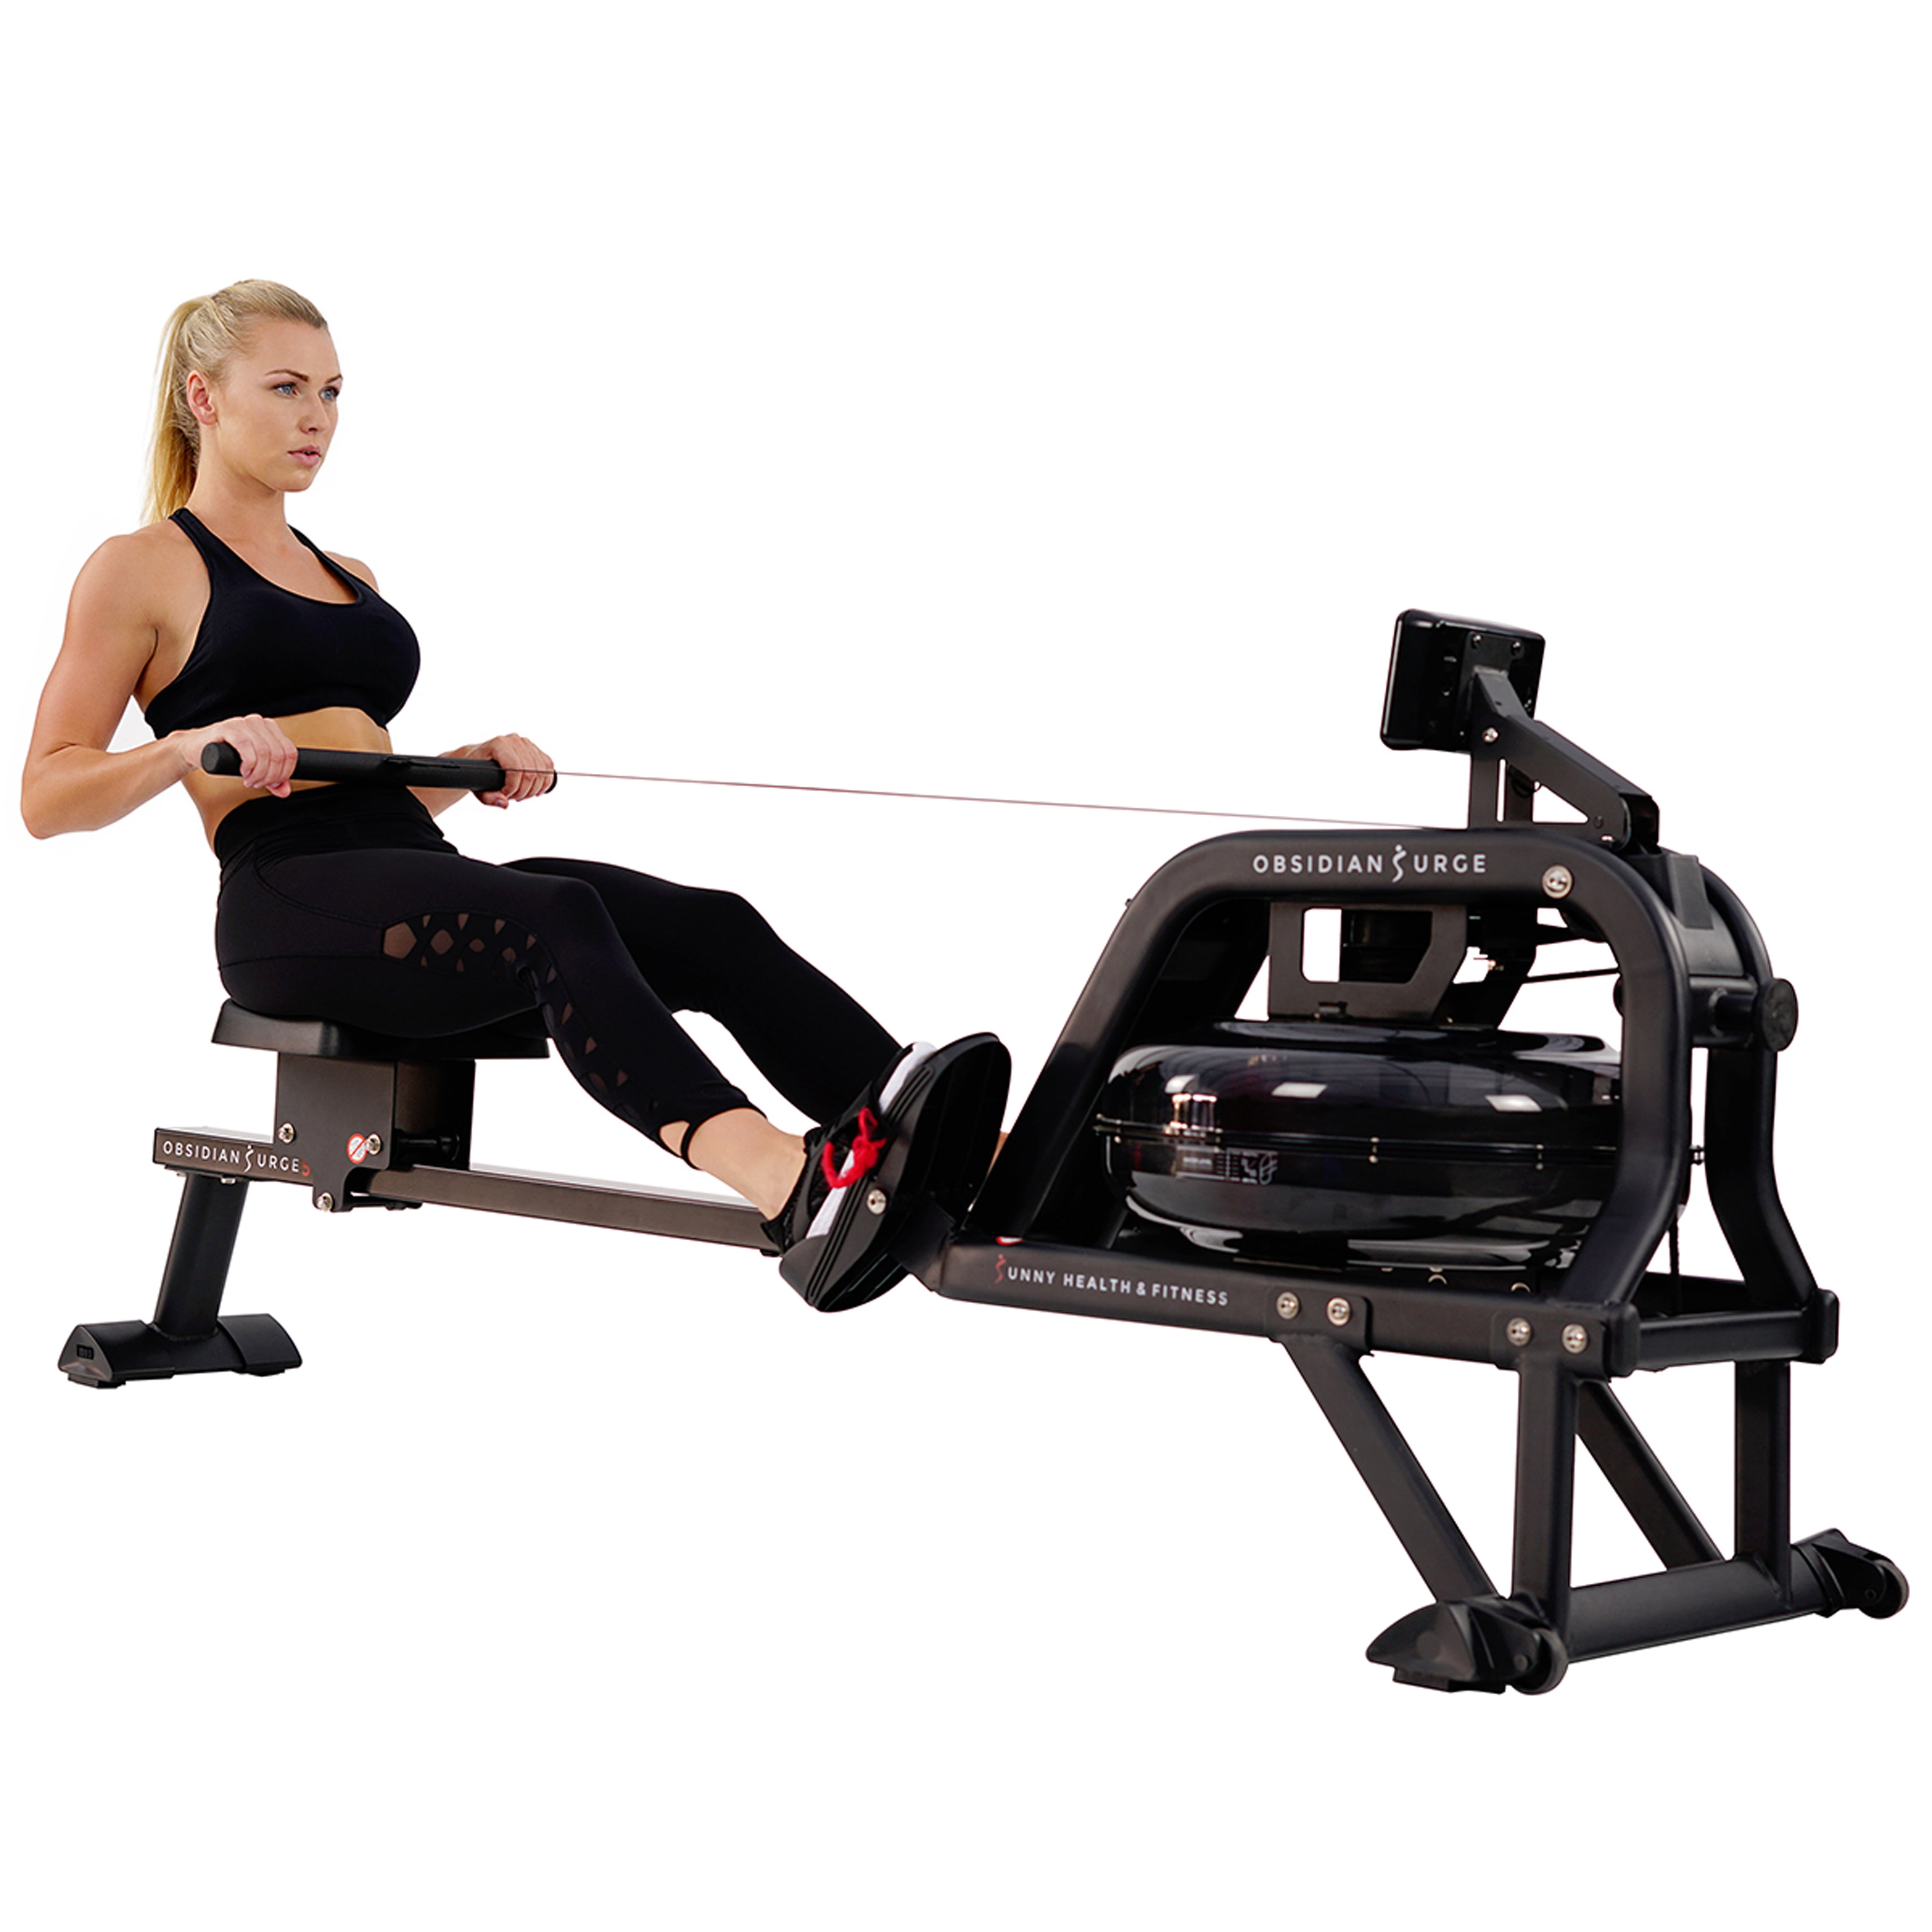 Sunny Health and Fitness Water Rowing Machine Rower for Home Exercise Workouts, Full Body Cross Fit Training, LCD Monitor SF-RW5713